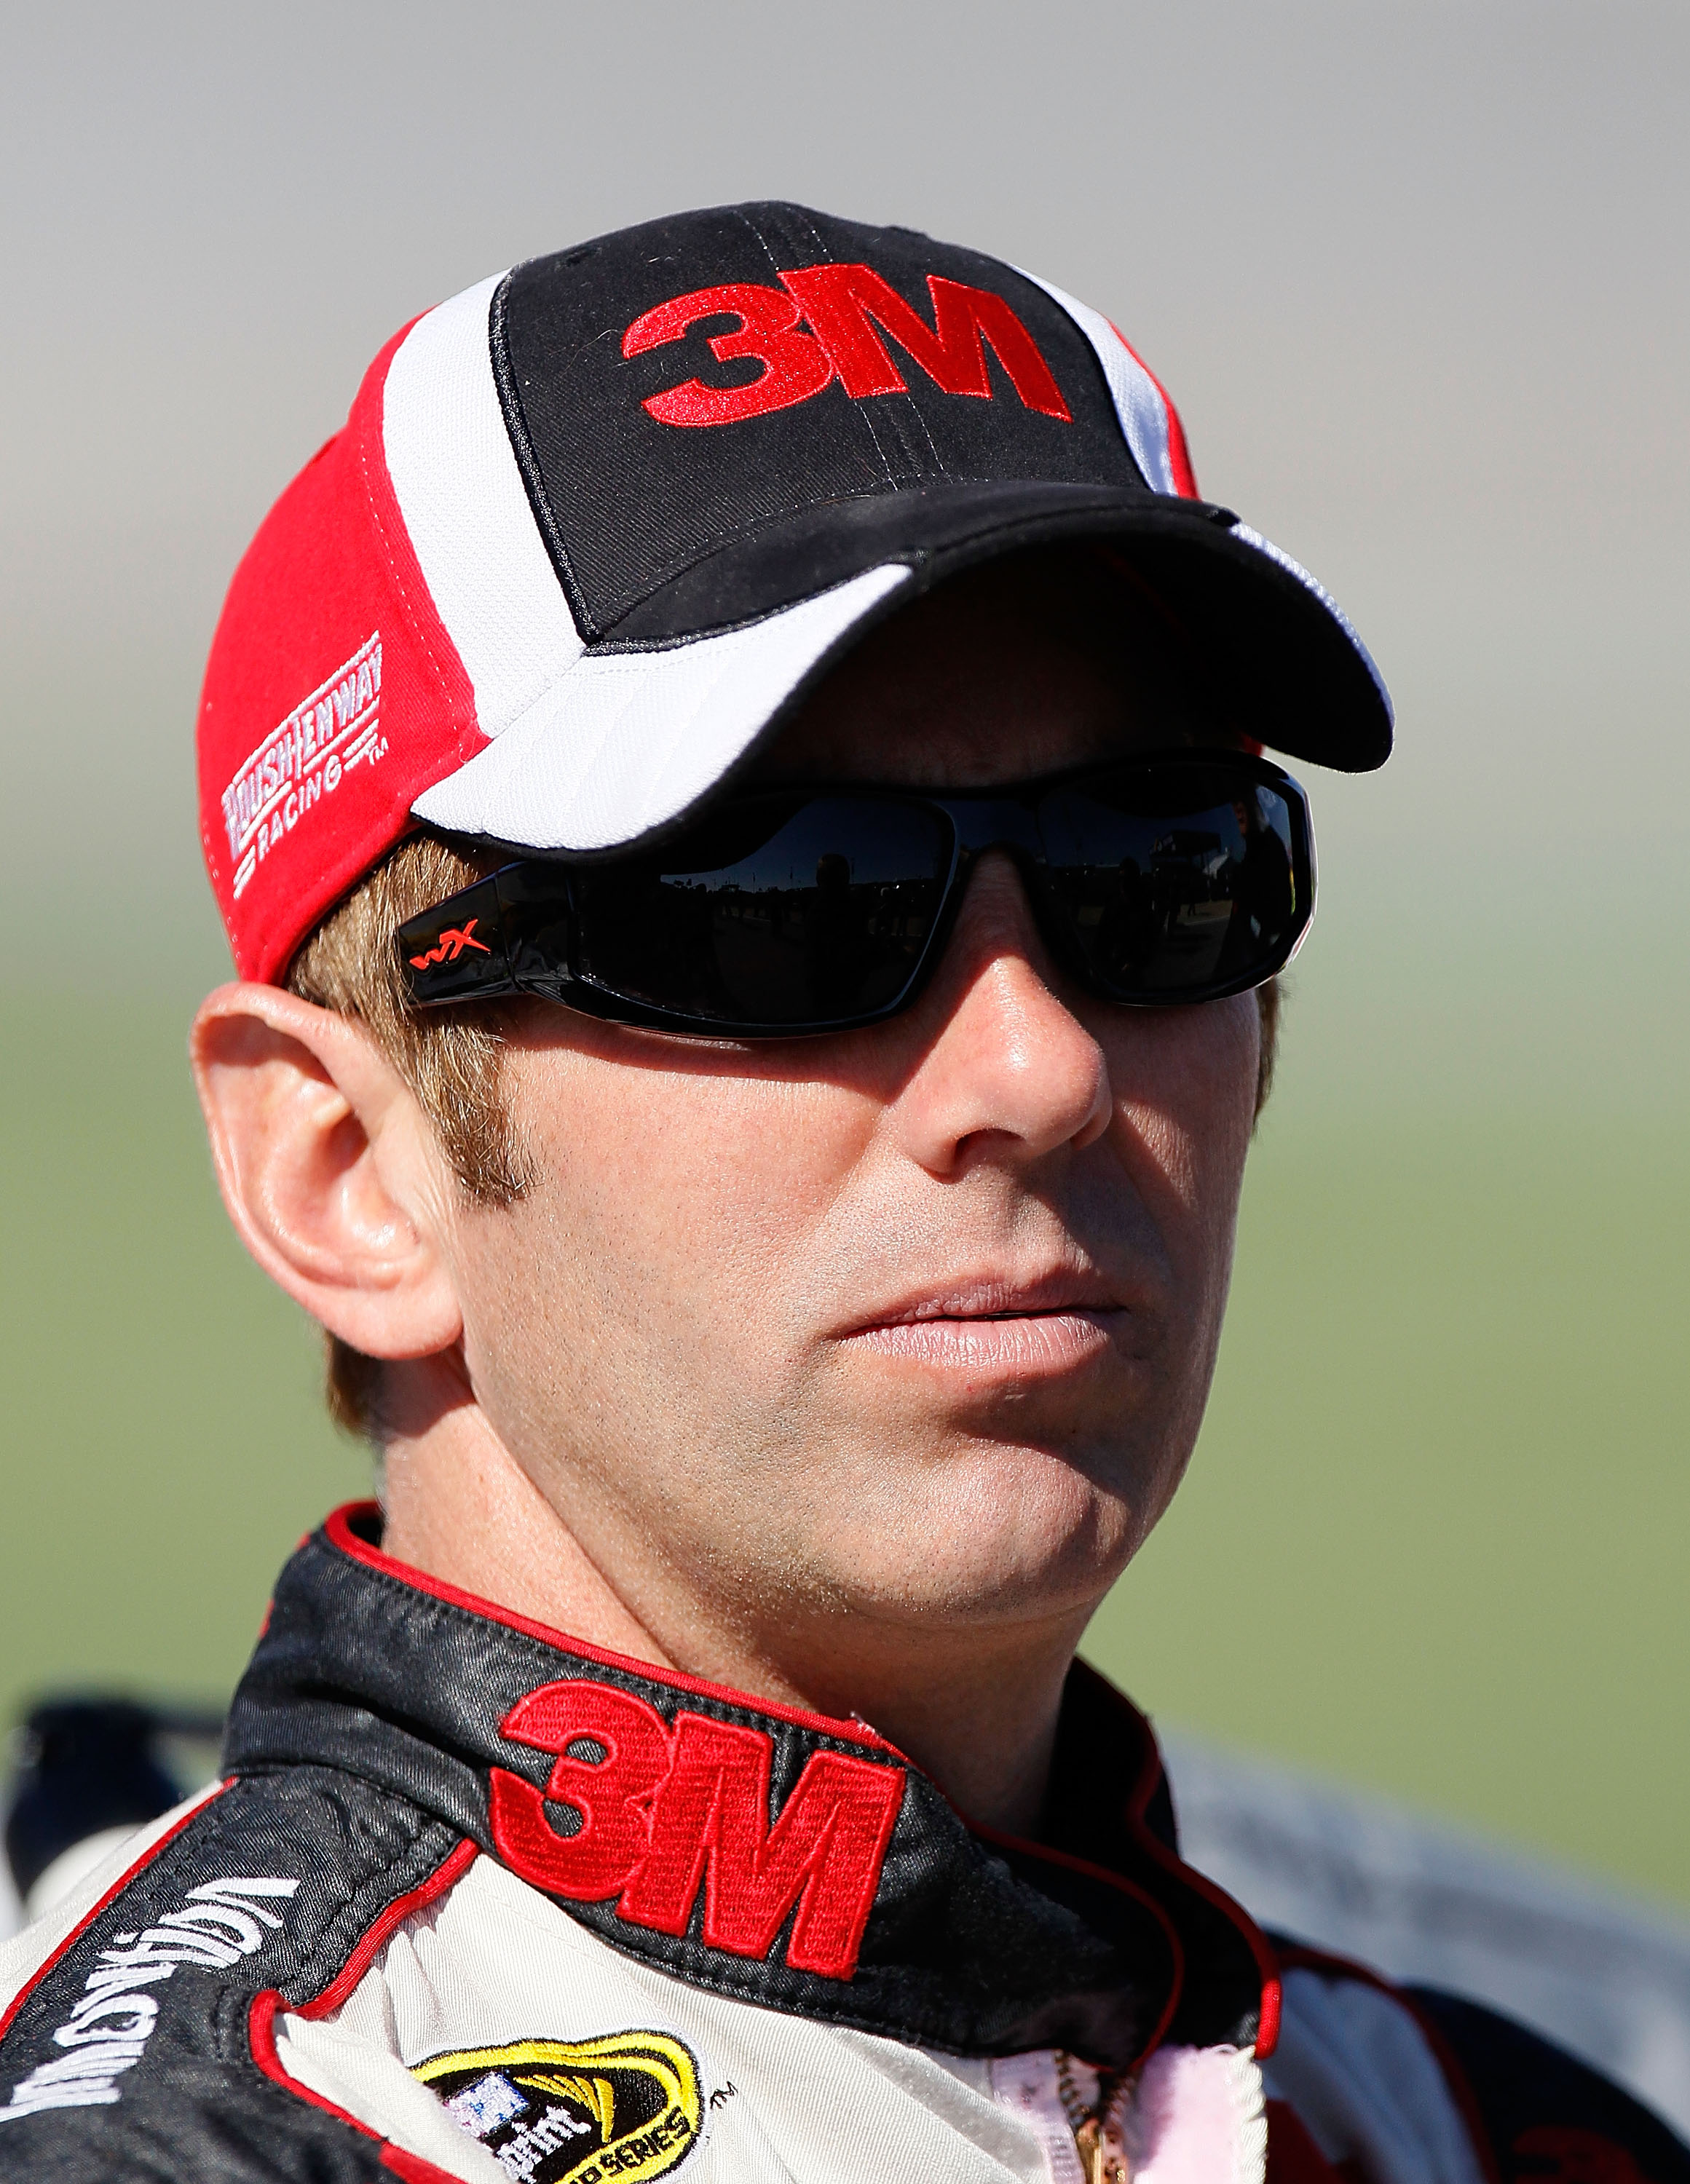 TALLADEGA, AL - OCTOBER 30:  Greg Biffle, driver of the #16 3M Ford, stands on pit road during qualifying for the NASCAR Sprint Cup Series AMP Energy Juice 500 at Talladega Superspeedway on October 30, 2010 in Talladega, Alabama.  (Photo by Kevin C. Cox/G